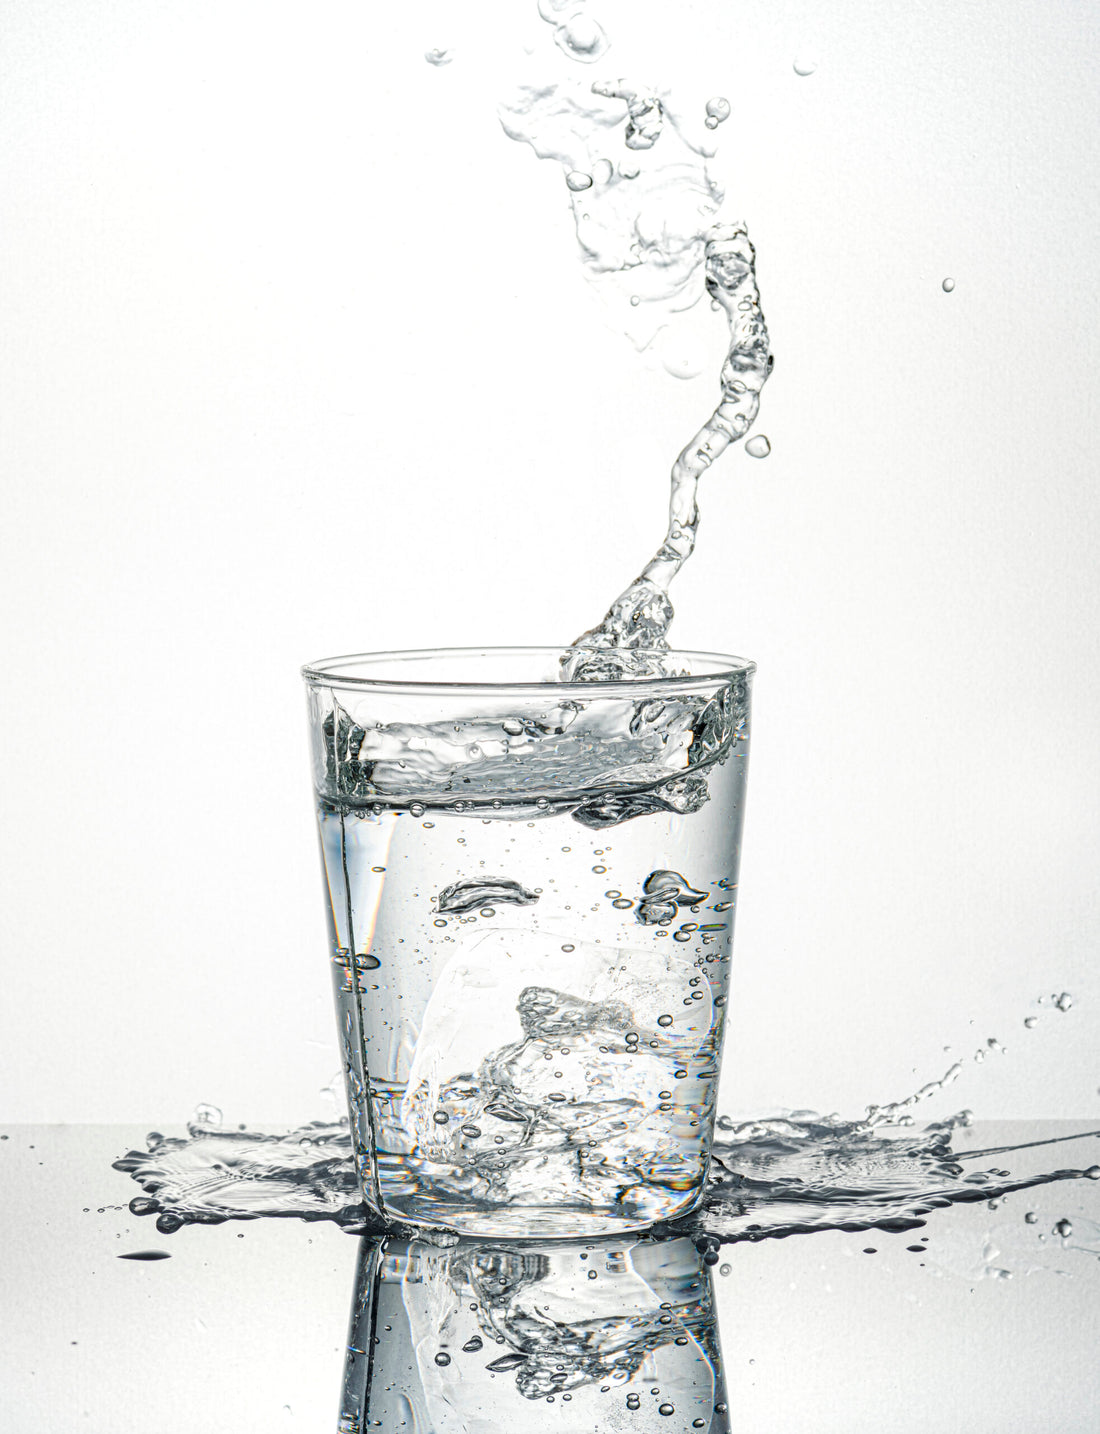 Read These Tips to Choose the Right Water for a Healthy Lifestyle